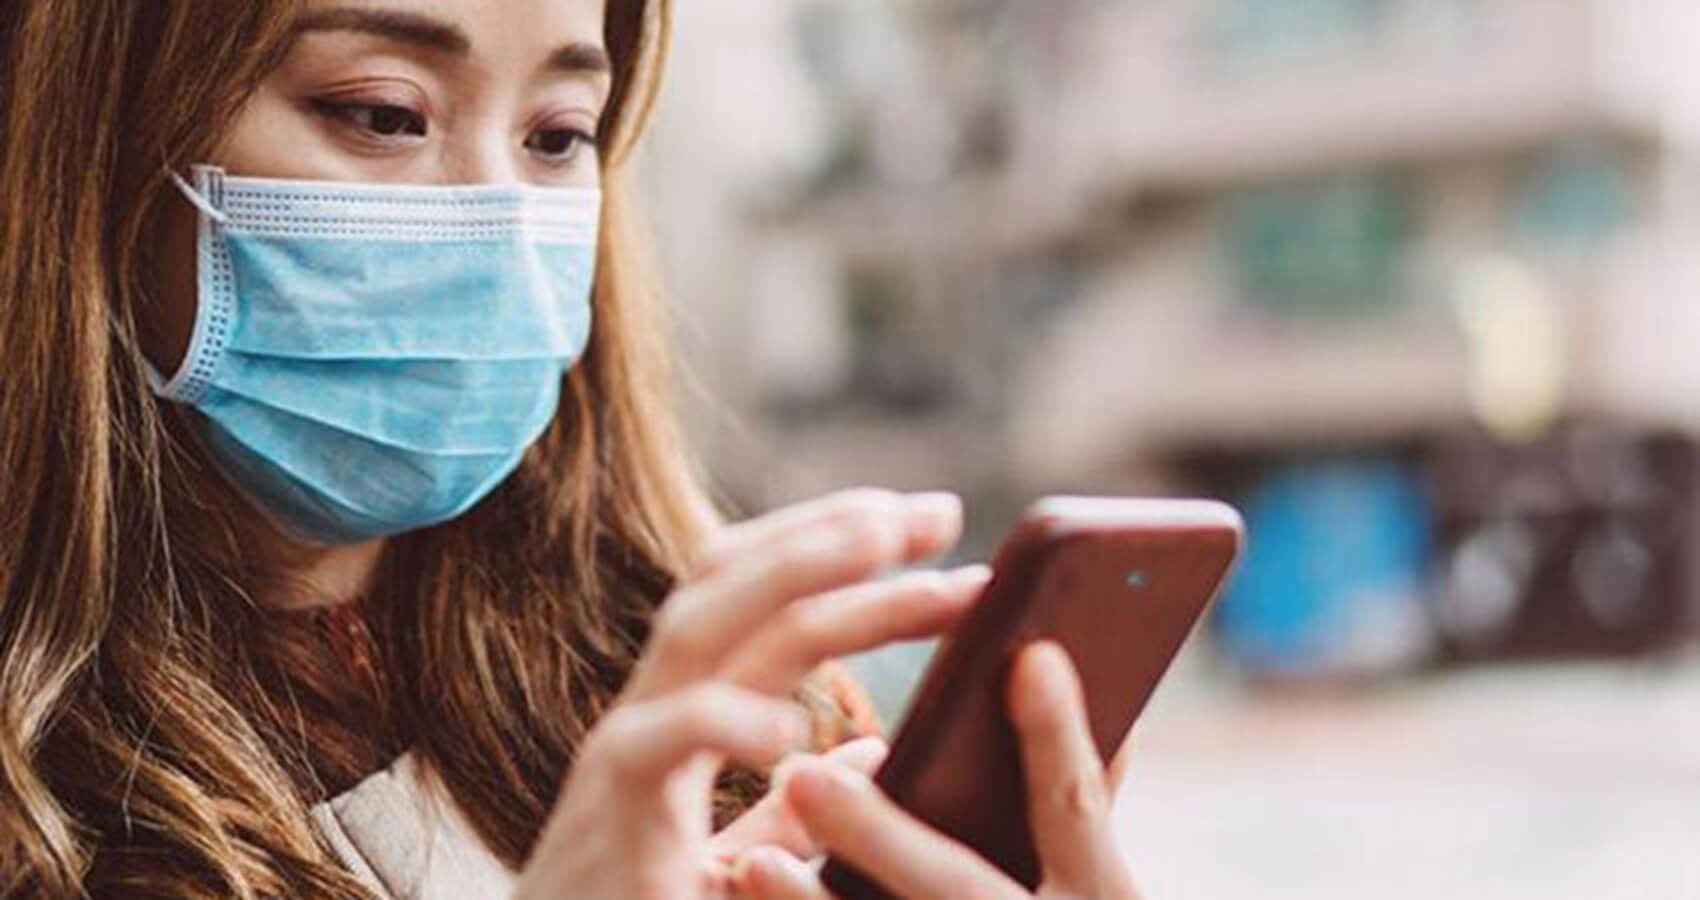 Your Phone Can Send You An Alert If You Were Near Someone Who Has Coronavirus